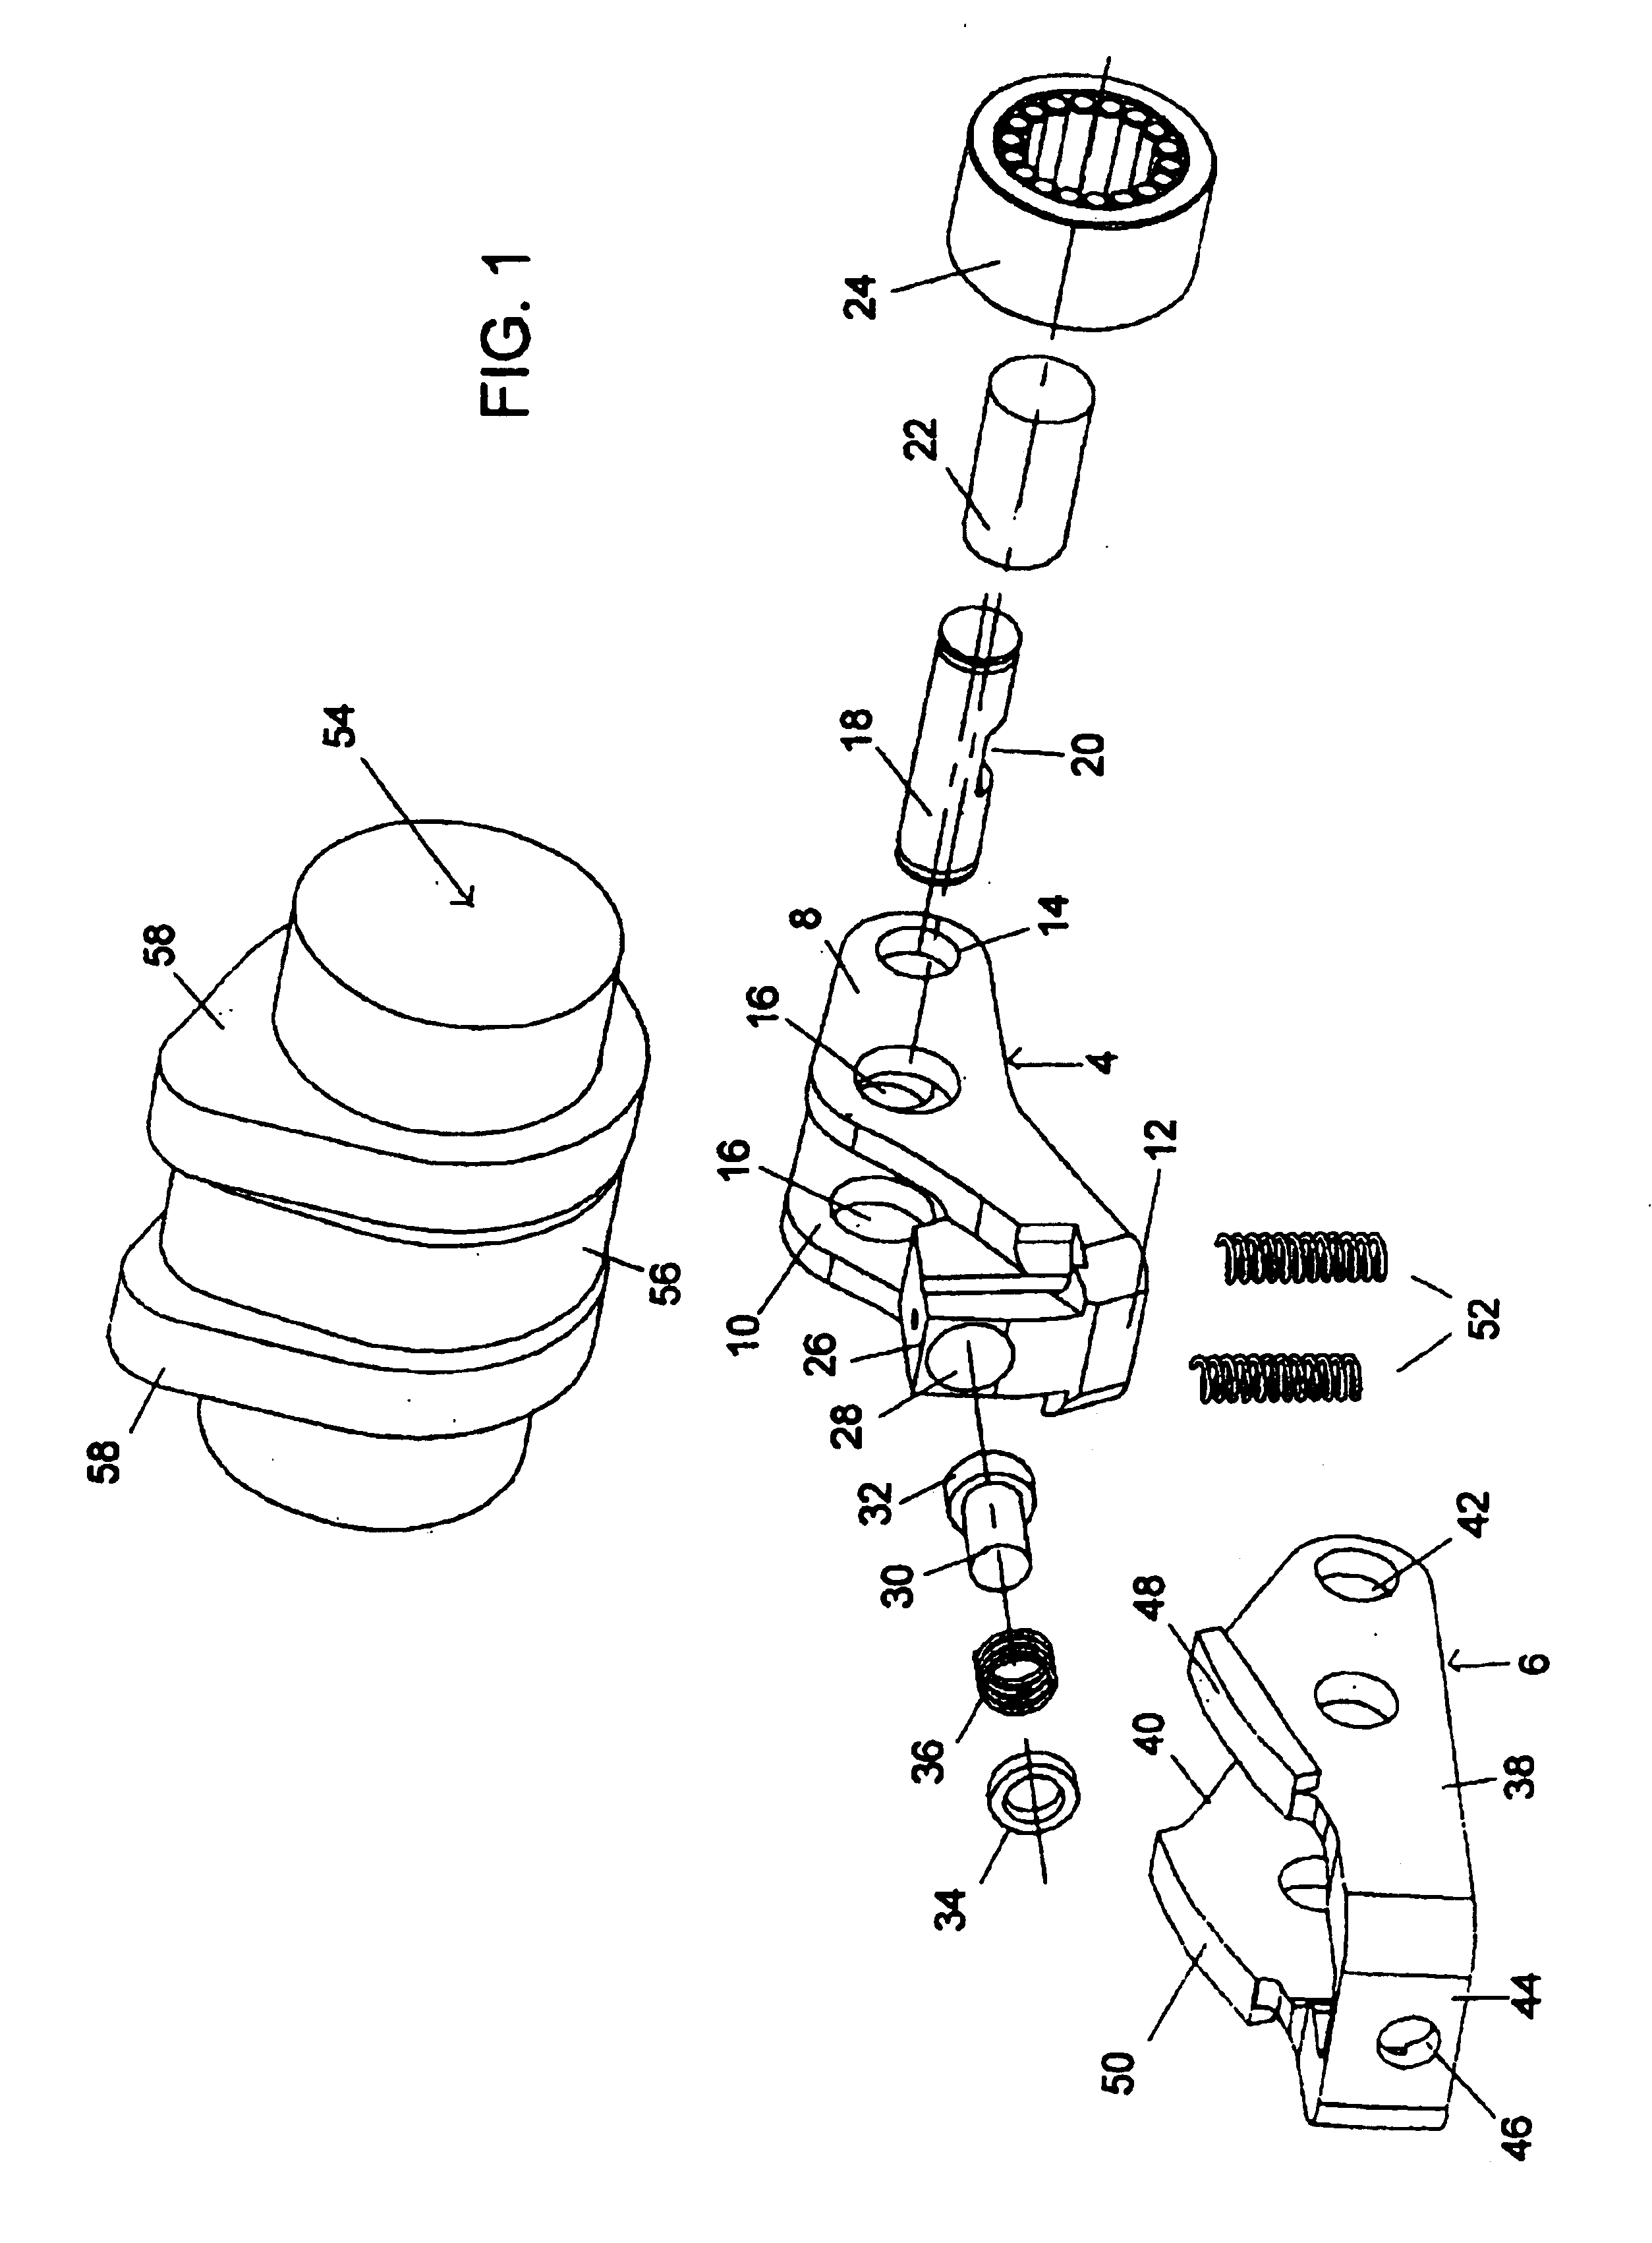 Apparatus for the adjustment of the stroke of a valve actuated by a camshaft